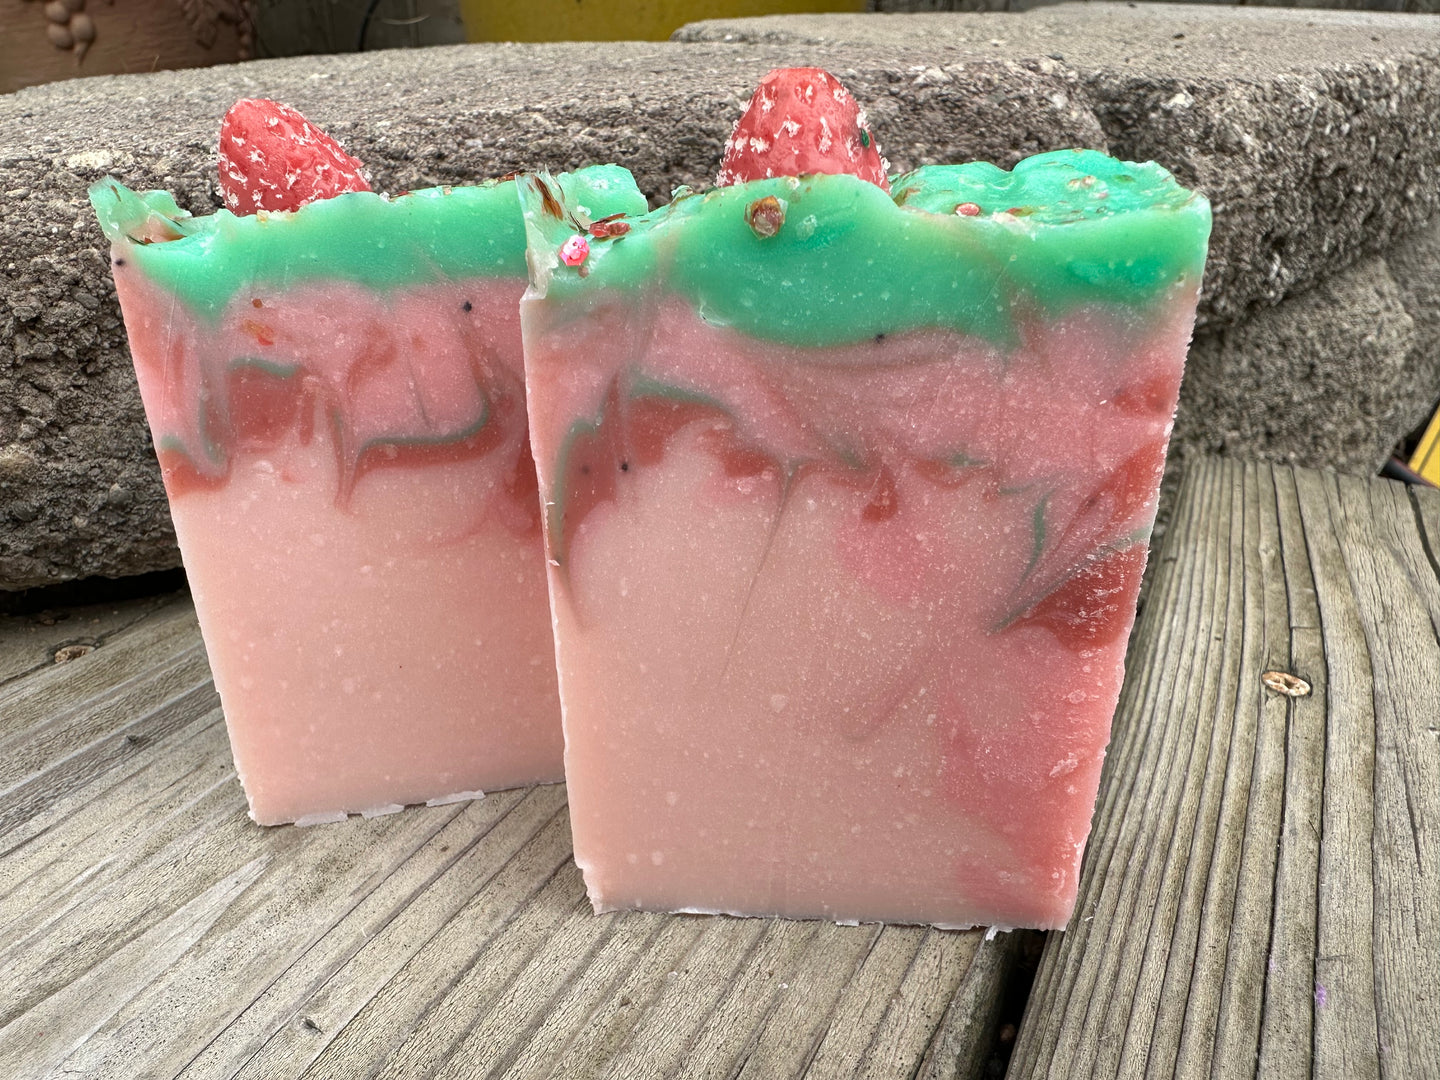 Pink soap bar with red and green swirls; soap strawberry embed on top.